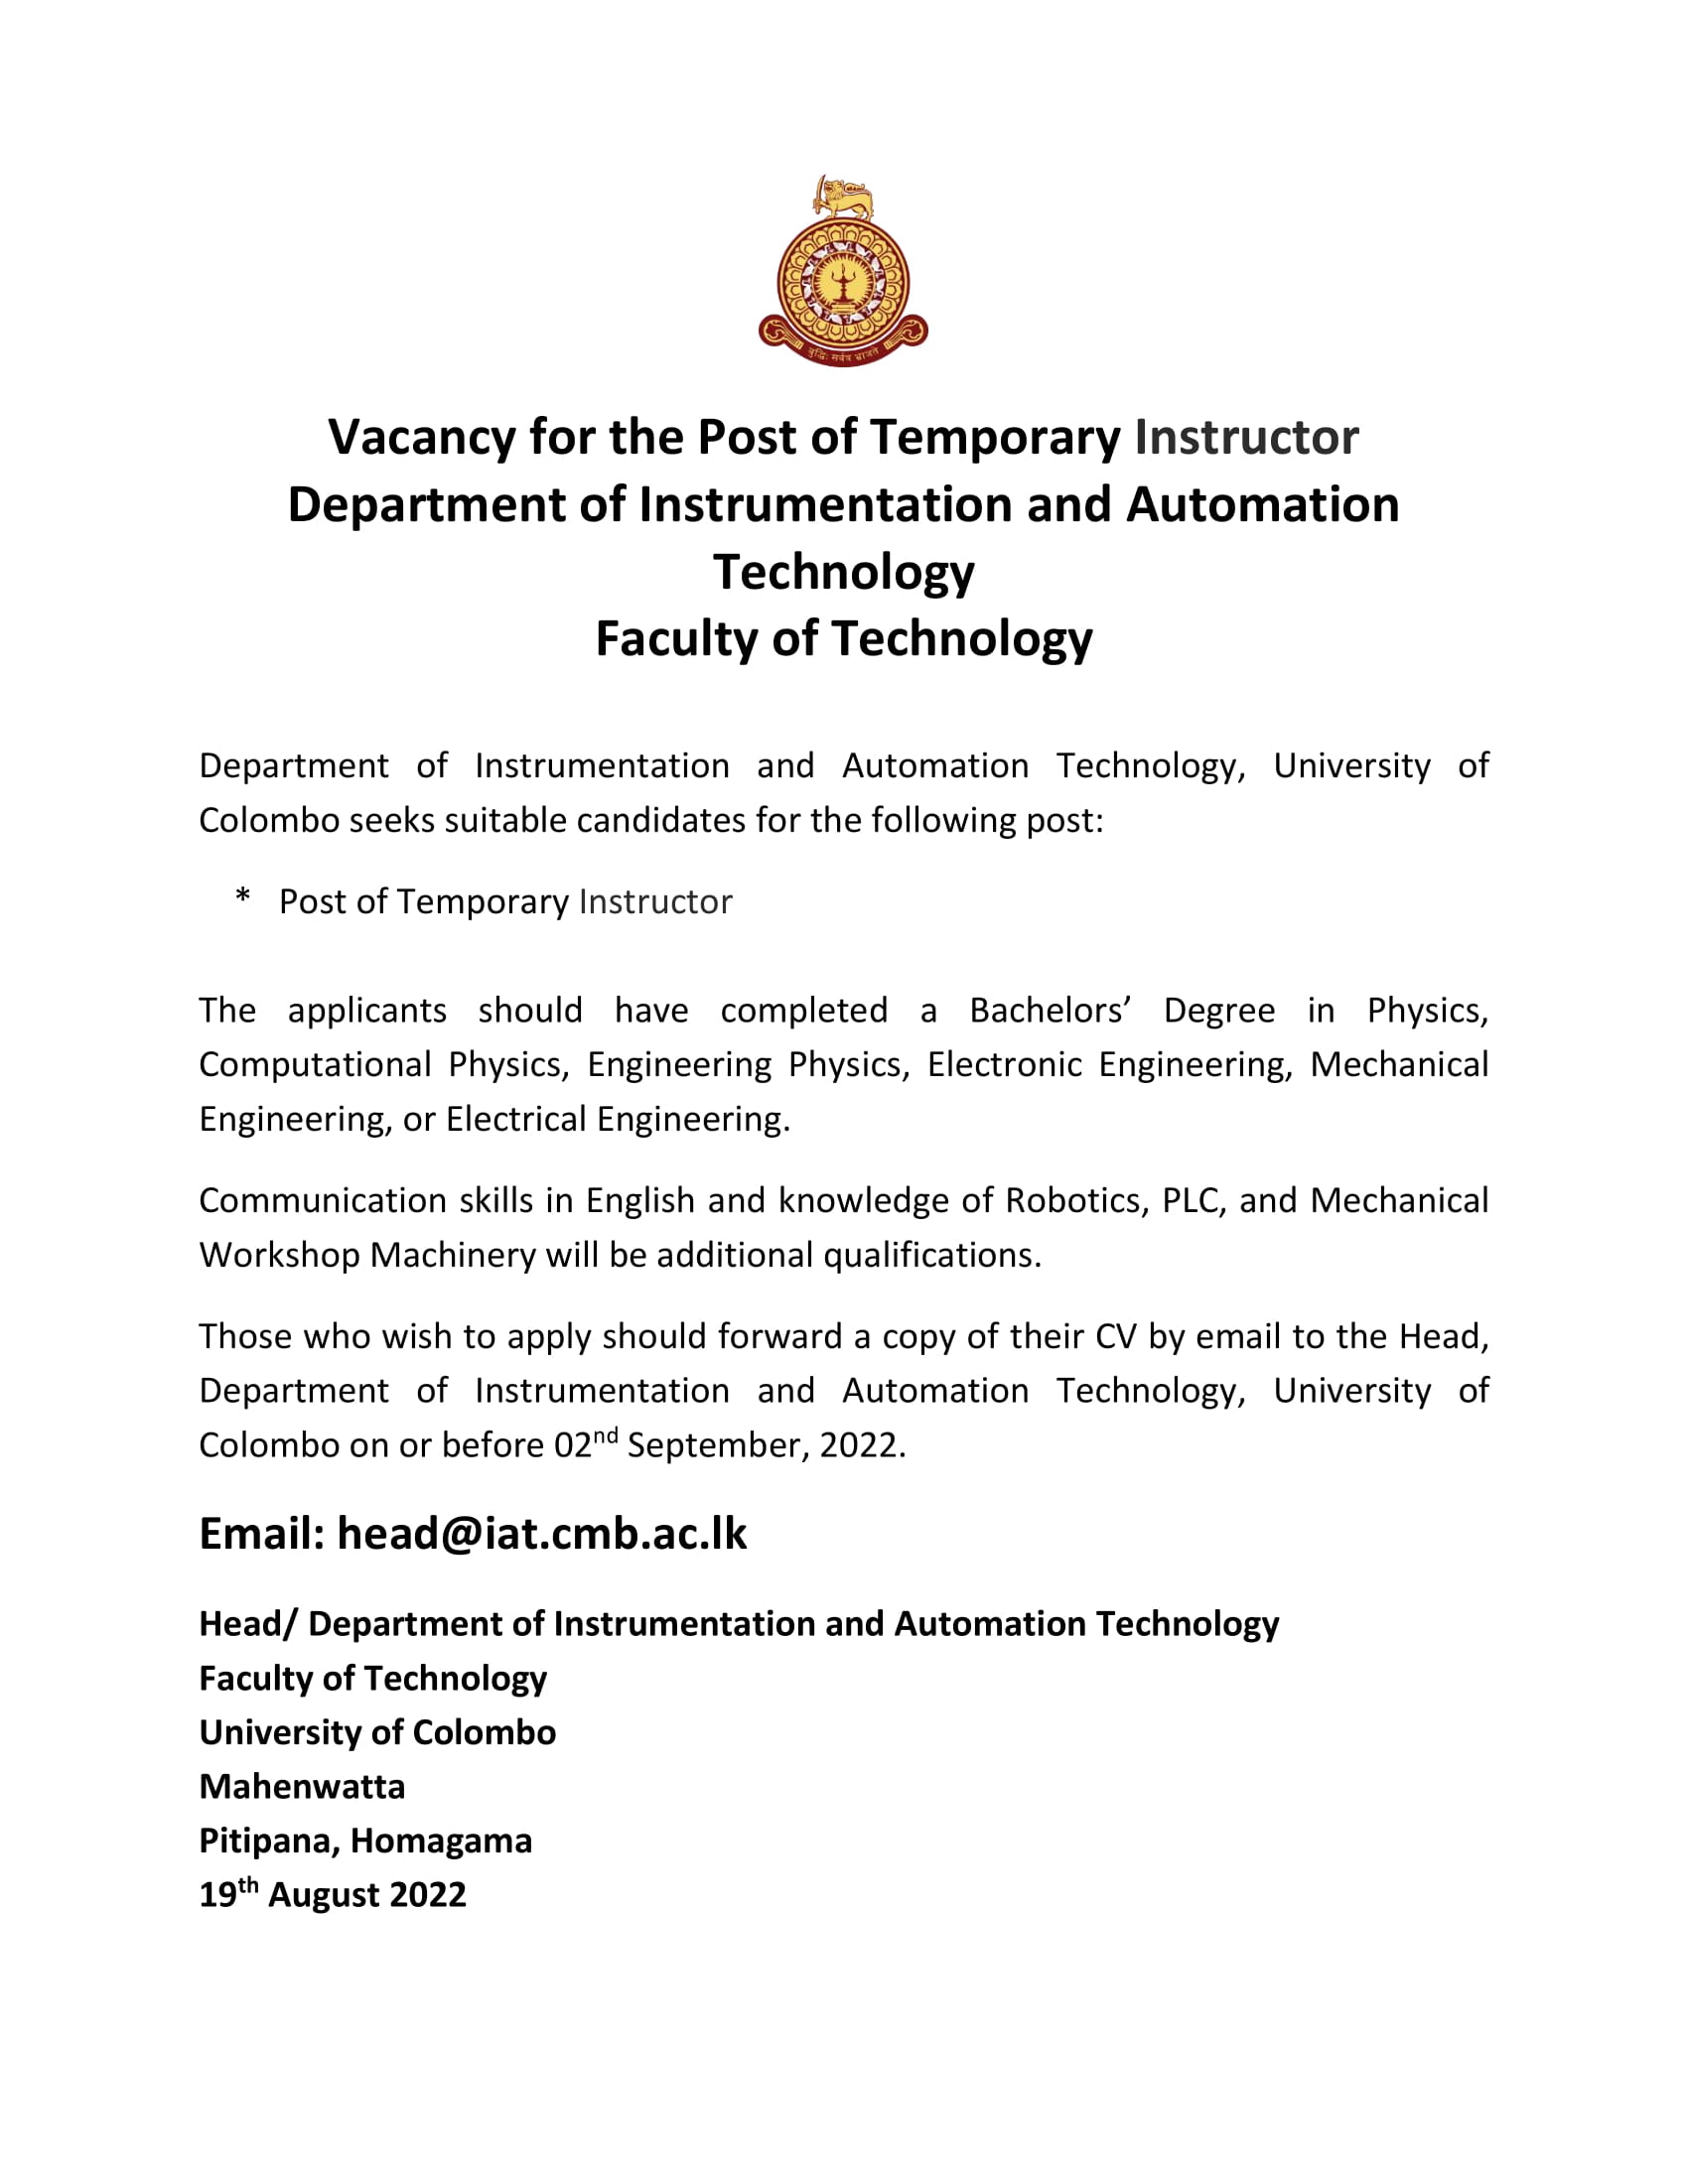 Vacancy for the Post of Temporary Instructor (Department of Instrumentation and Automation Technology)